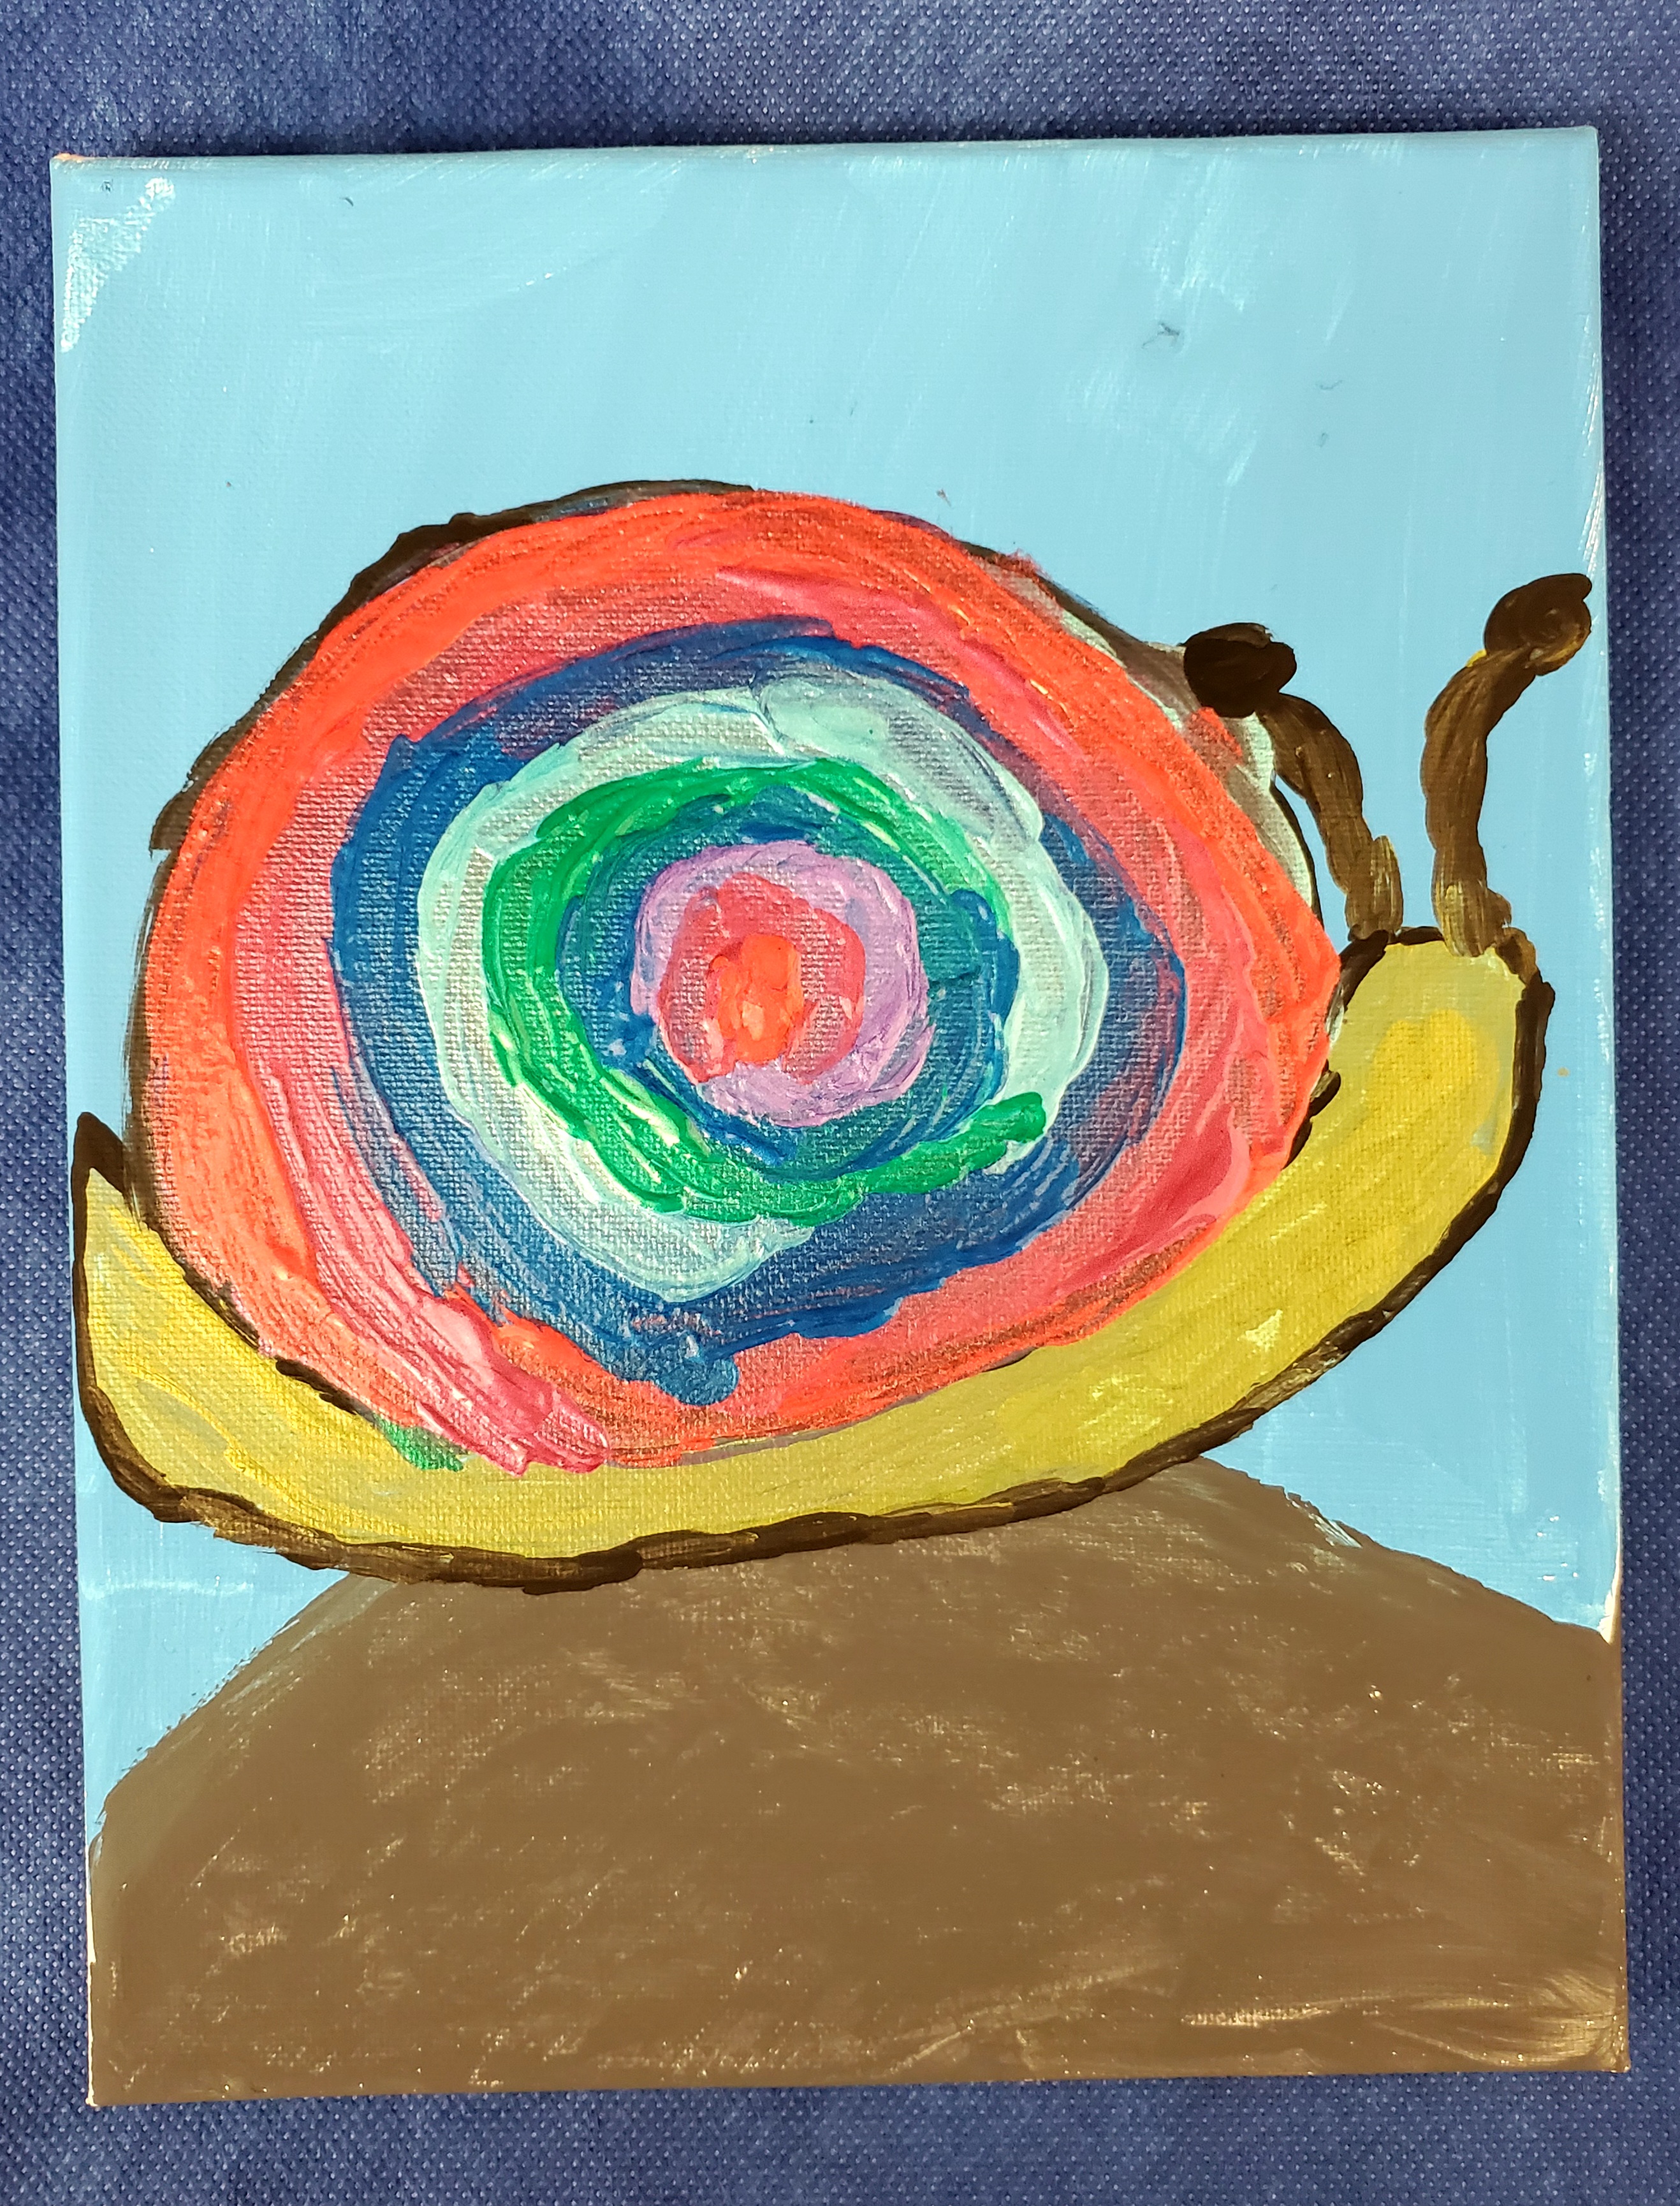 A lime green snail with a colorful shell (there are layers of pink, light pink, green, light blue, medium blue, orange, and red) sitting on a brown rock with a blue background.